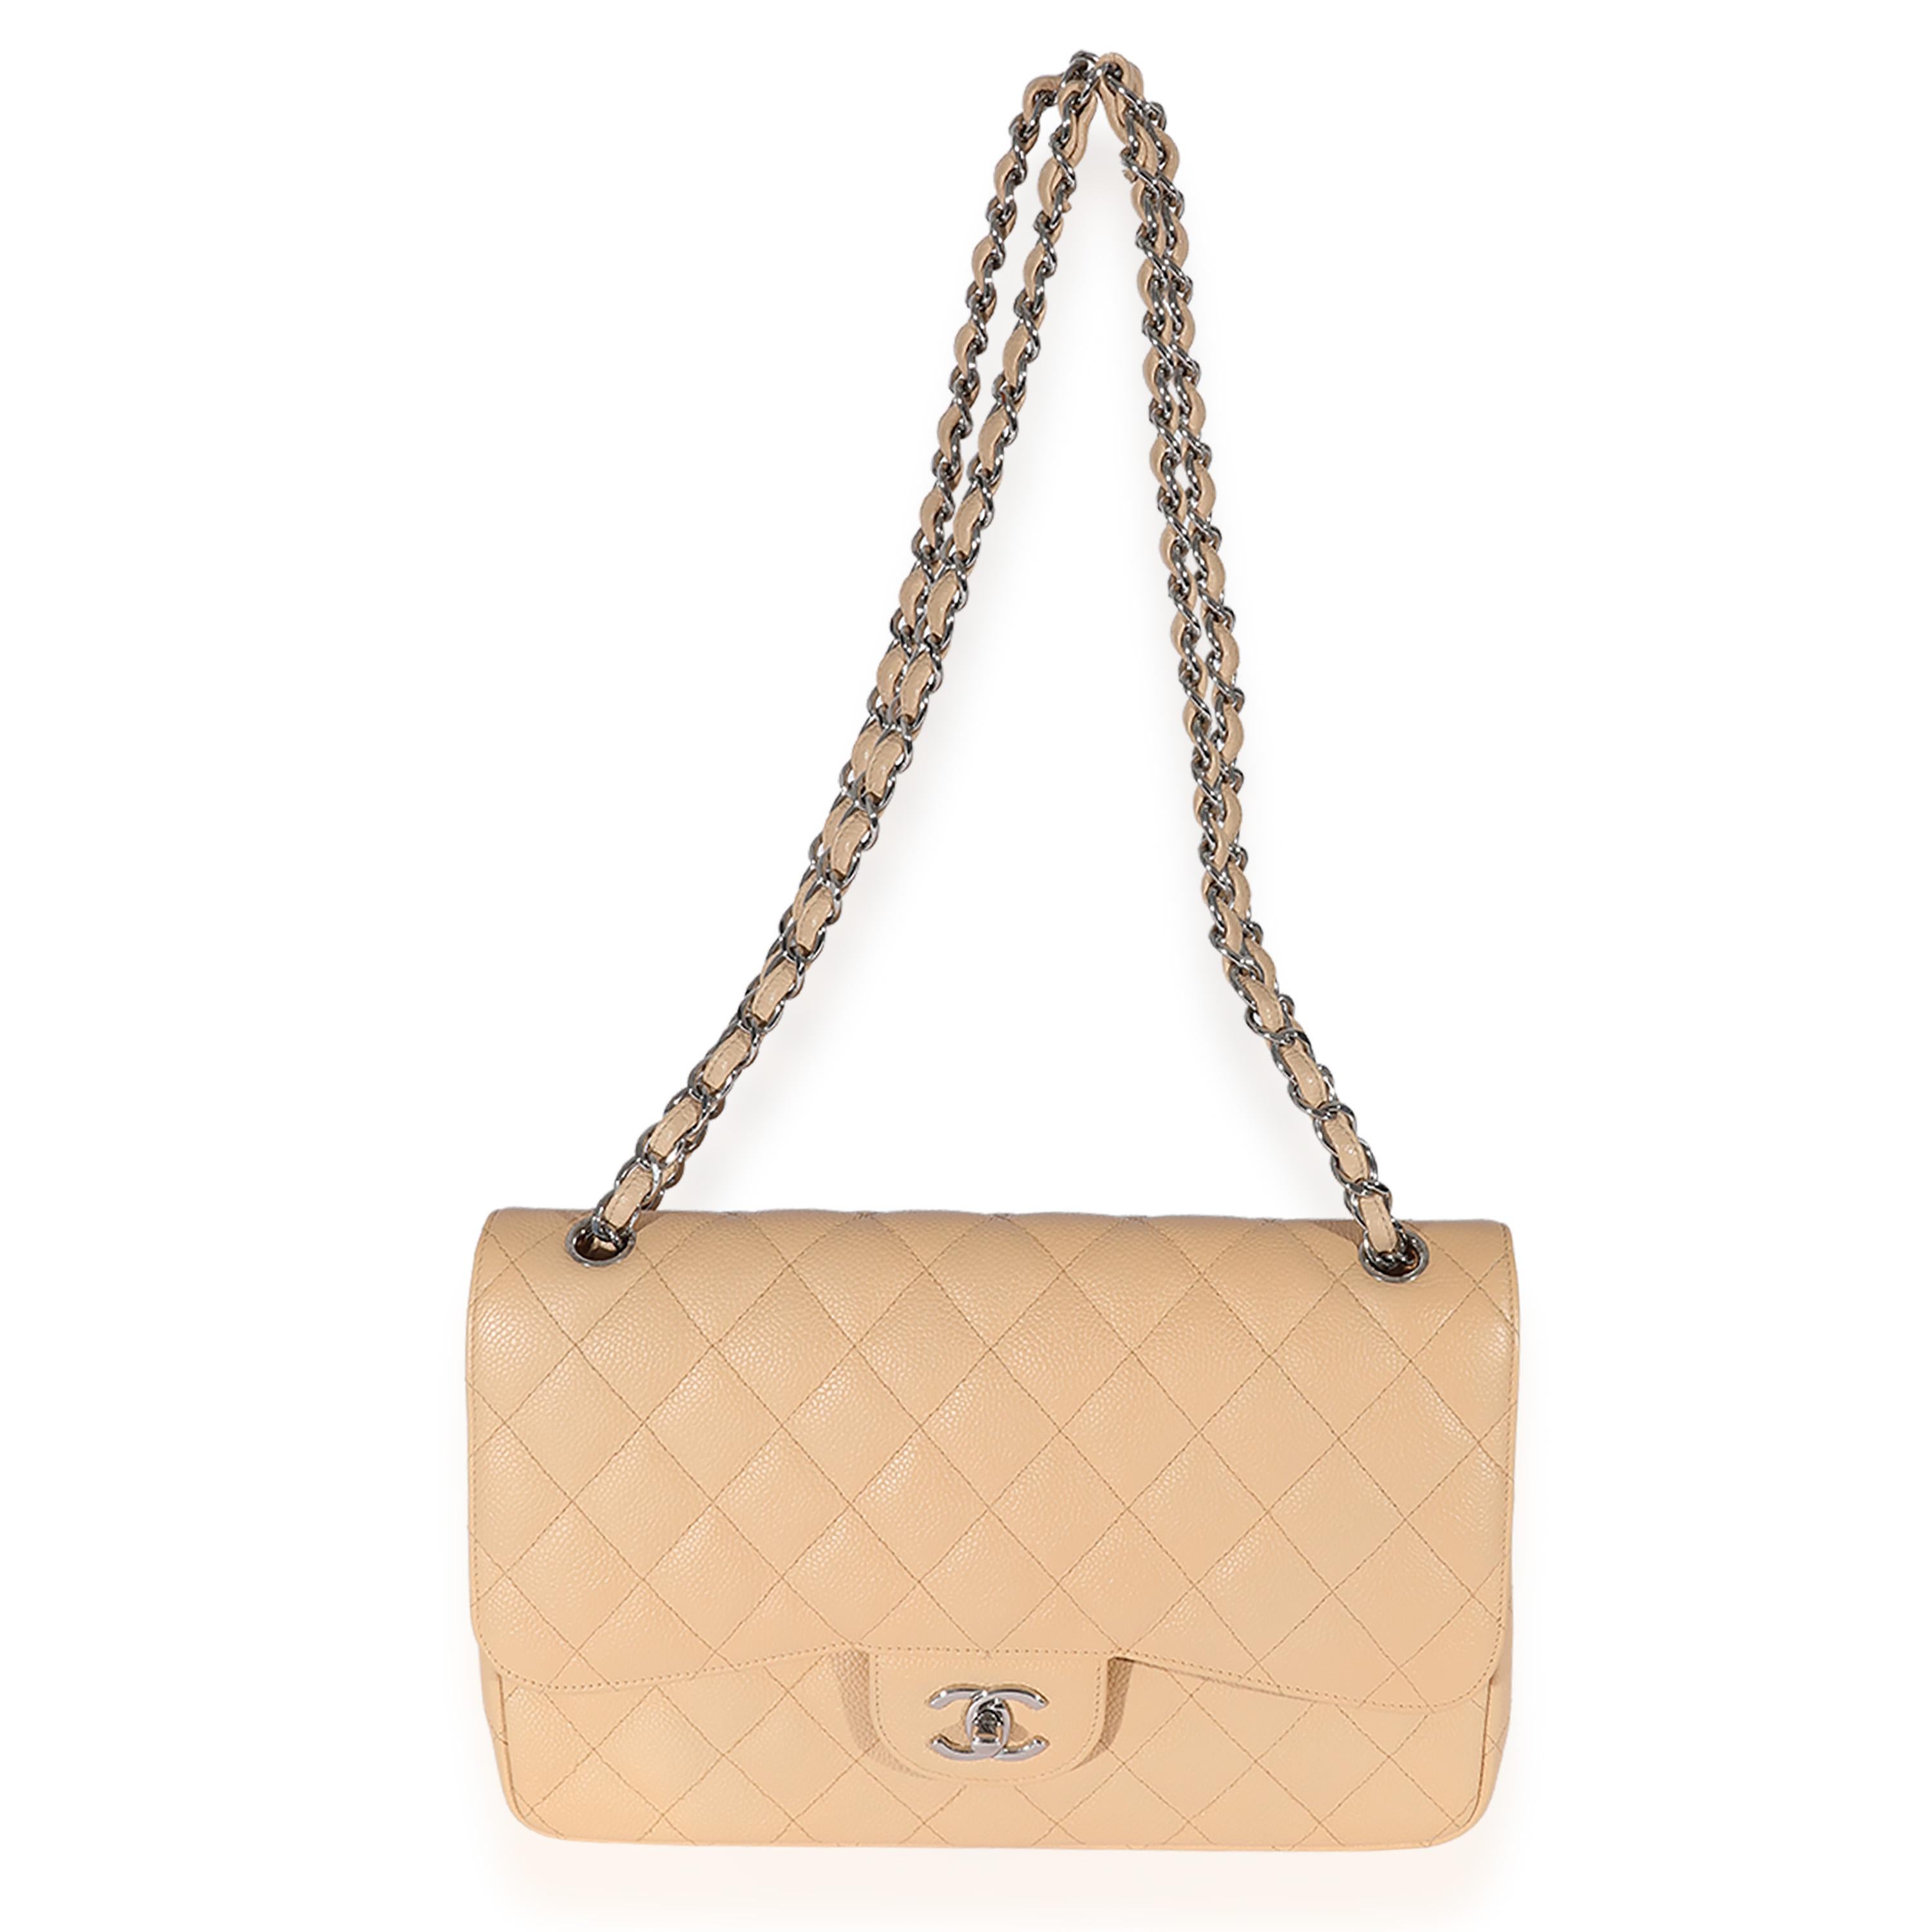 Listing Title: Chanel Beige Quilted Caviar Jumbo Classic Double Flap Bag
SKU: 125840
MSRP: 9500.00
Condition: Pre-owned 
Handbag Condition: Very Good
Condition Comments: Very Good Condition. Light scuffing throughout and at corners. Scratching at